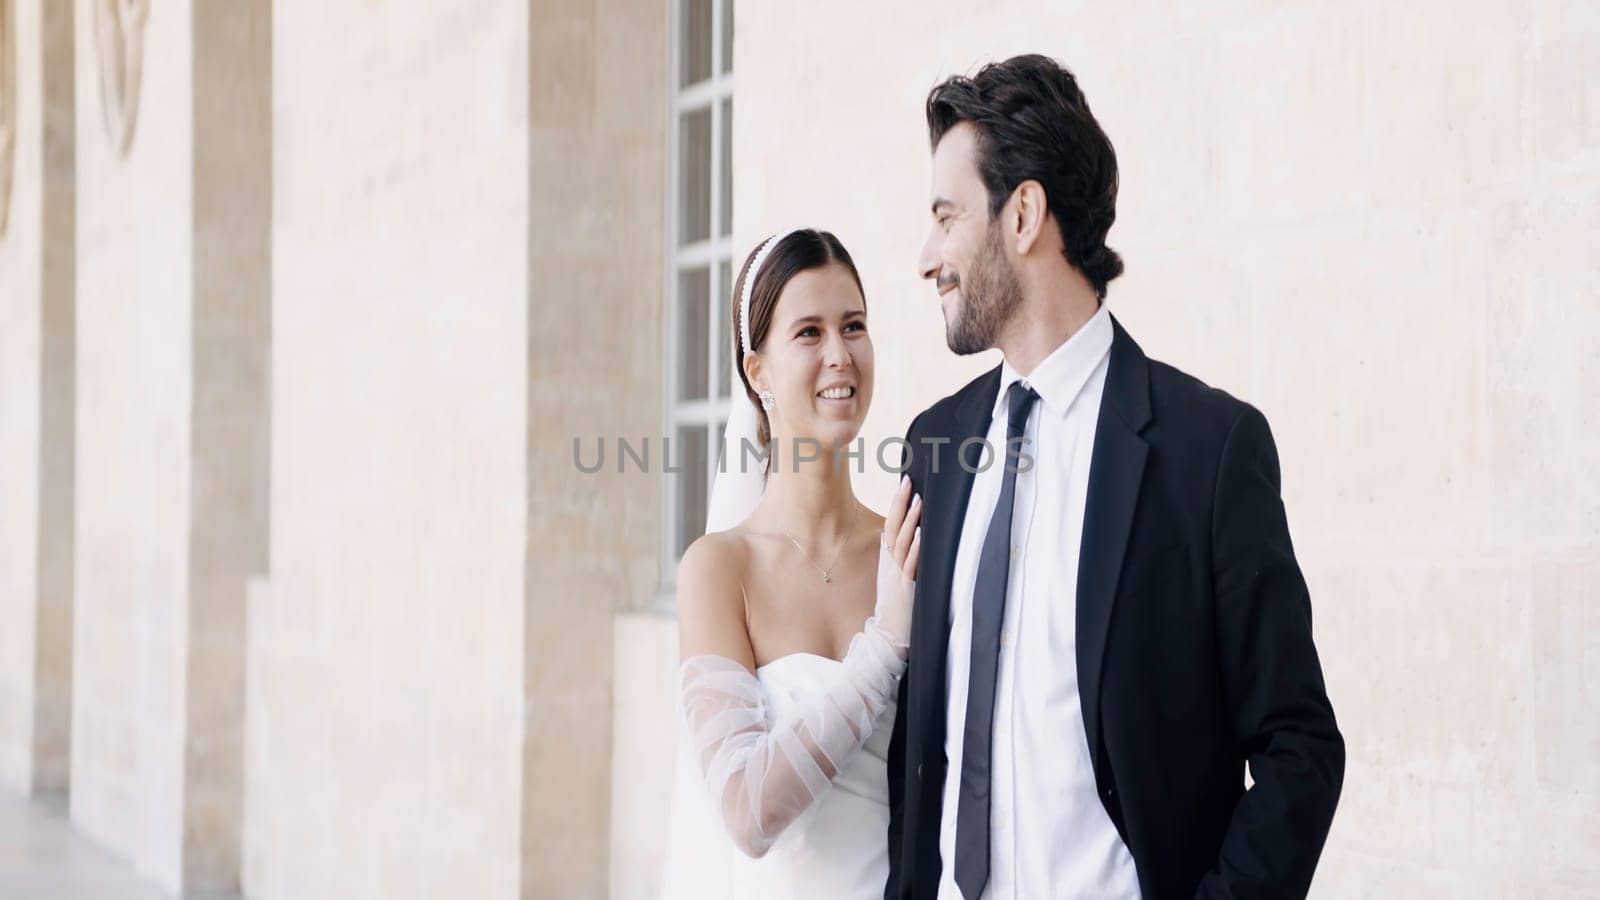 Newlyweds, caucasian bride and groom posing by the building outdoors. Action. Woman in white dress with a man in suit